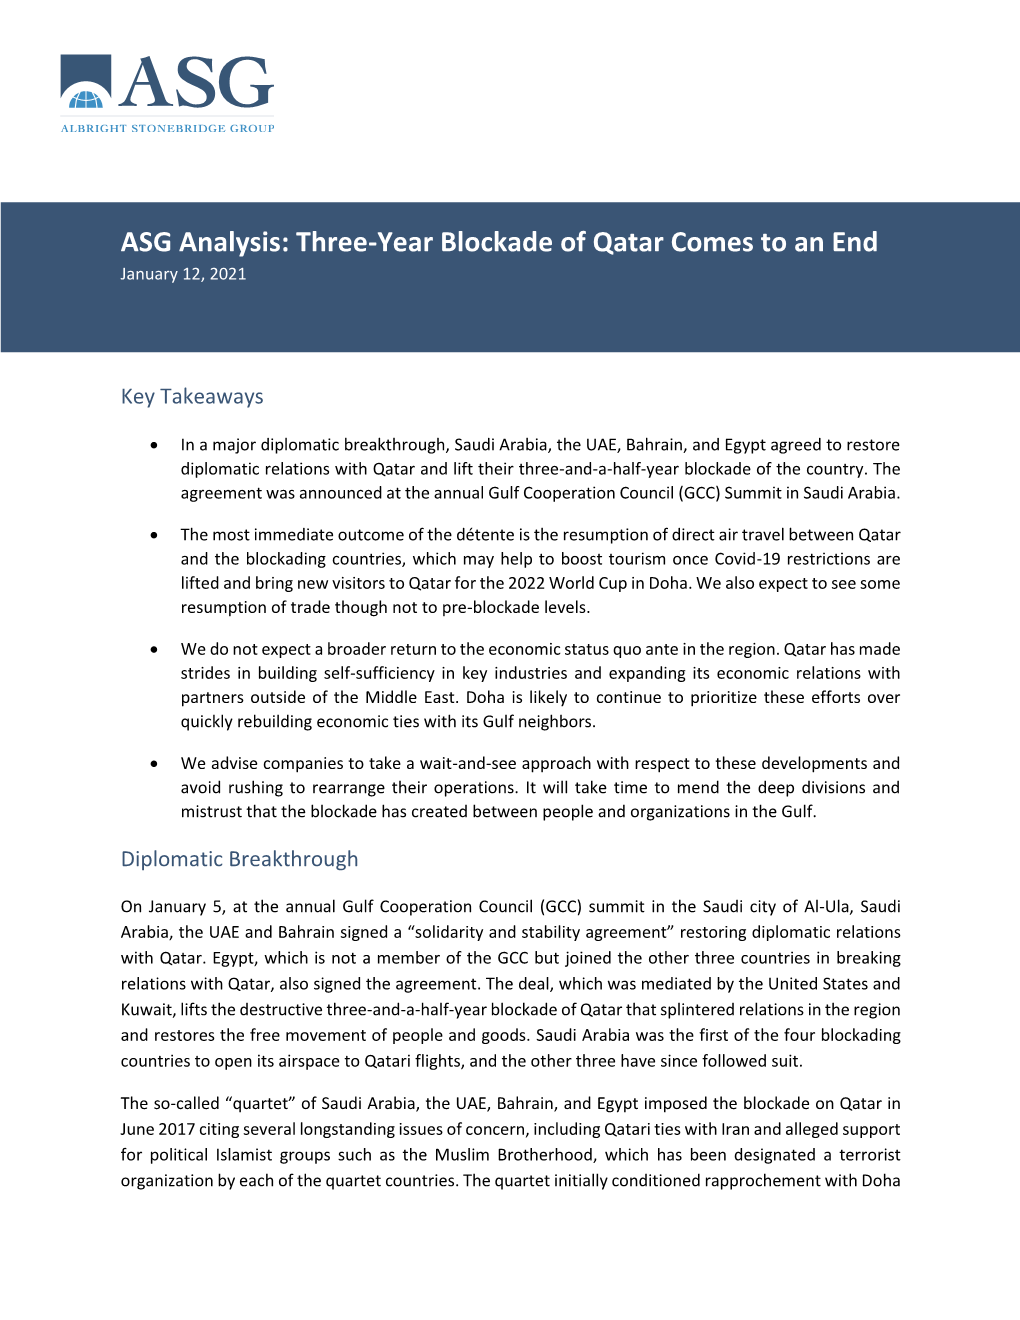 ASG Analysis: Three-Year Blockade of Qatar Comes to an End January 12, 2021